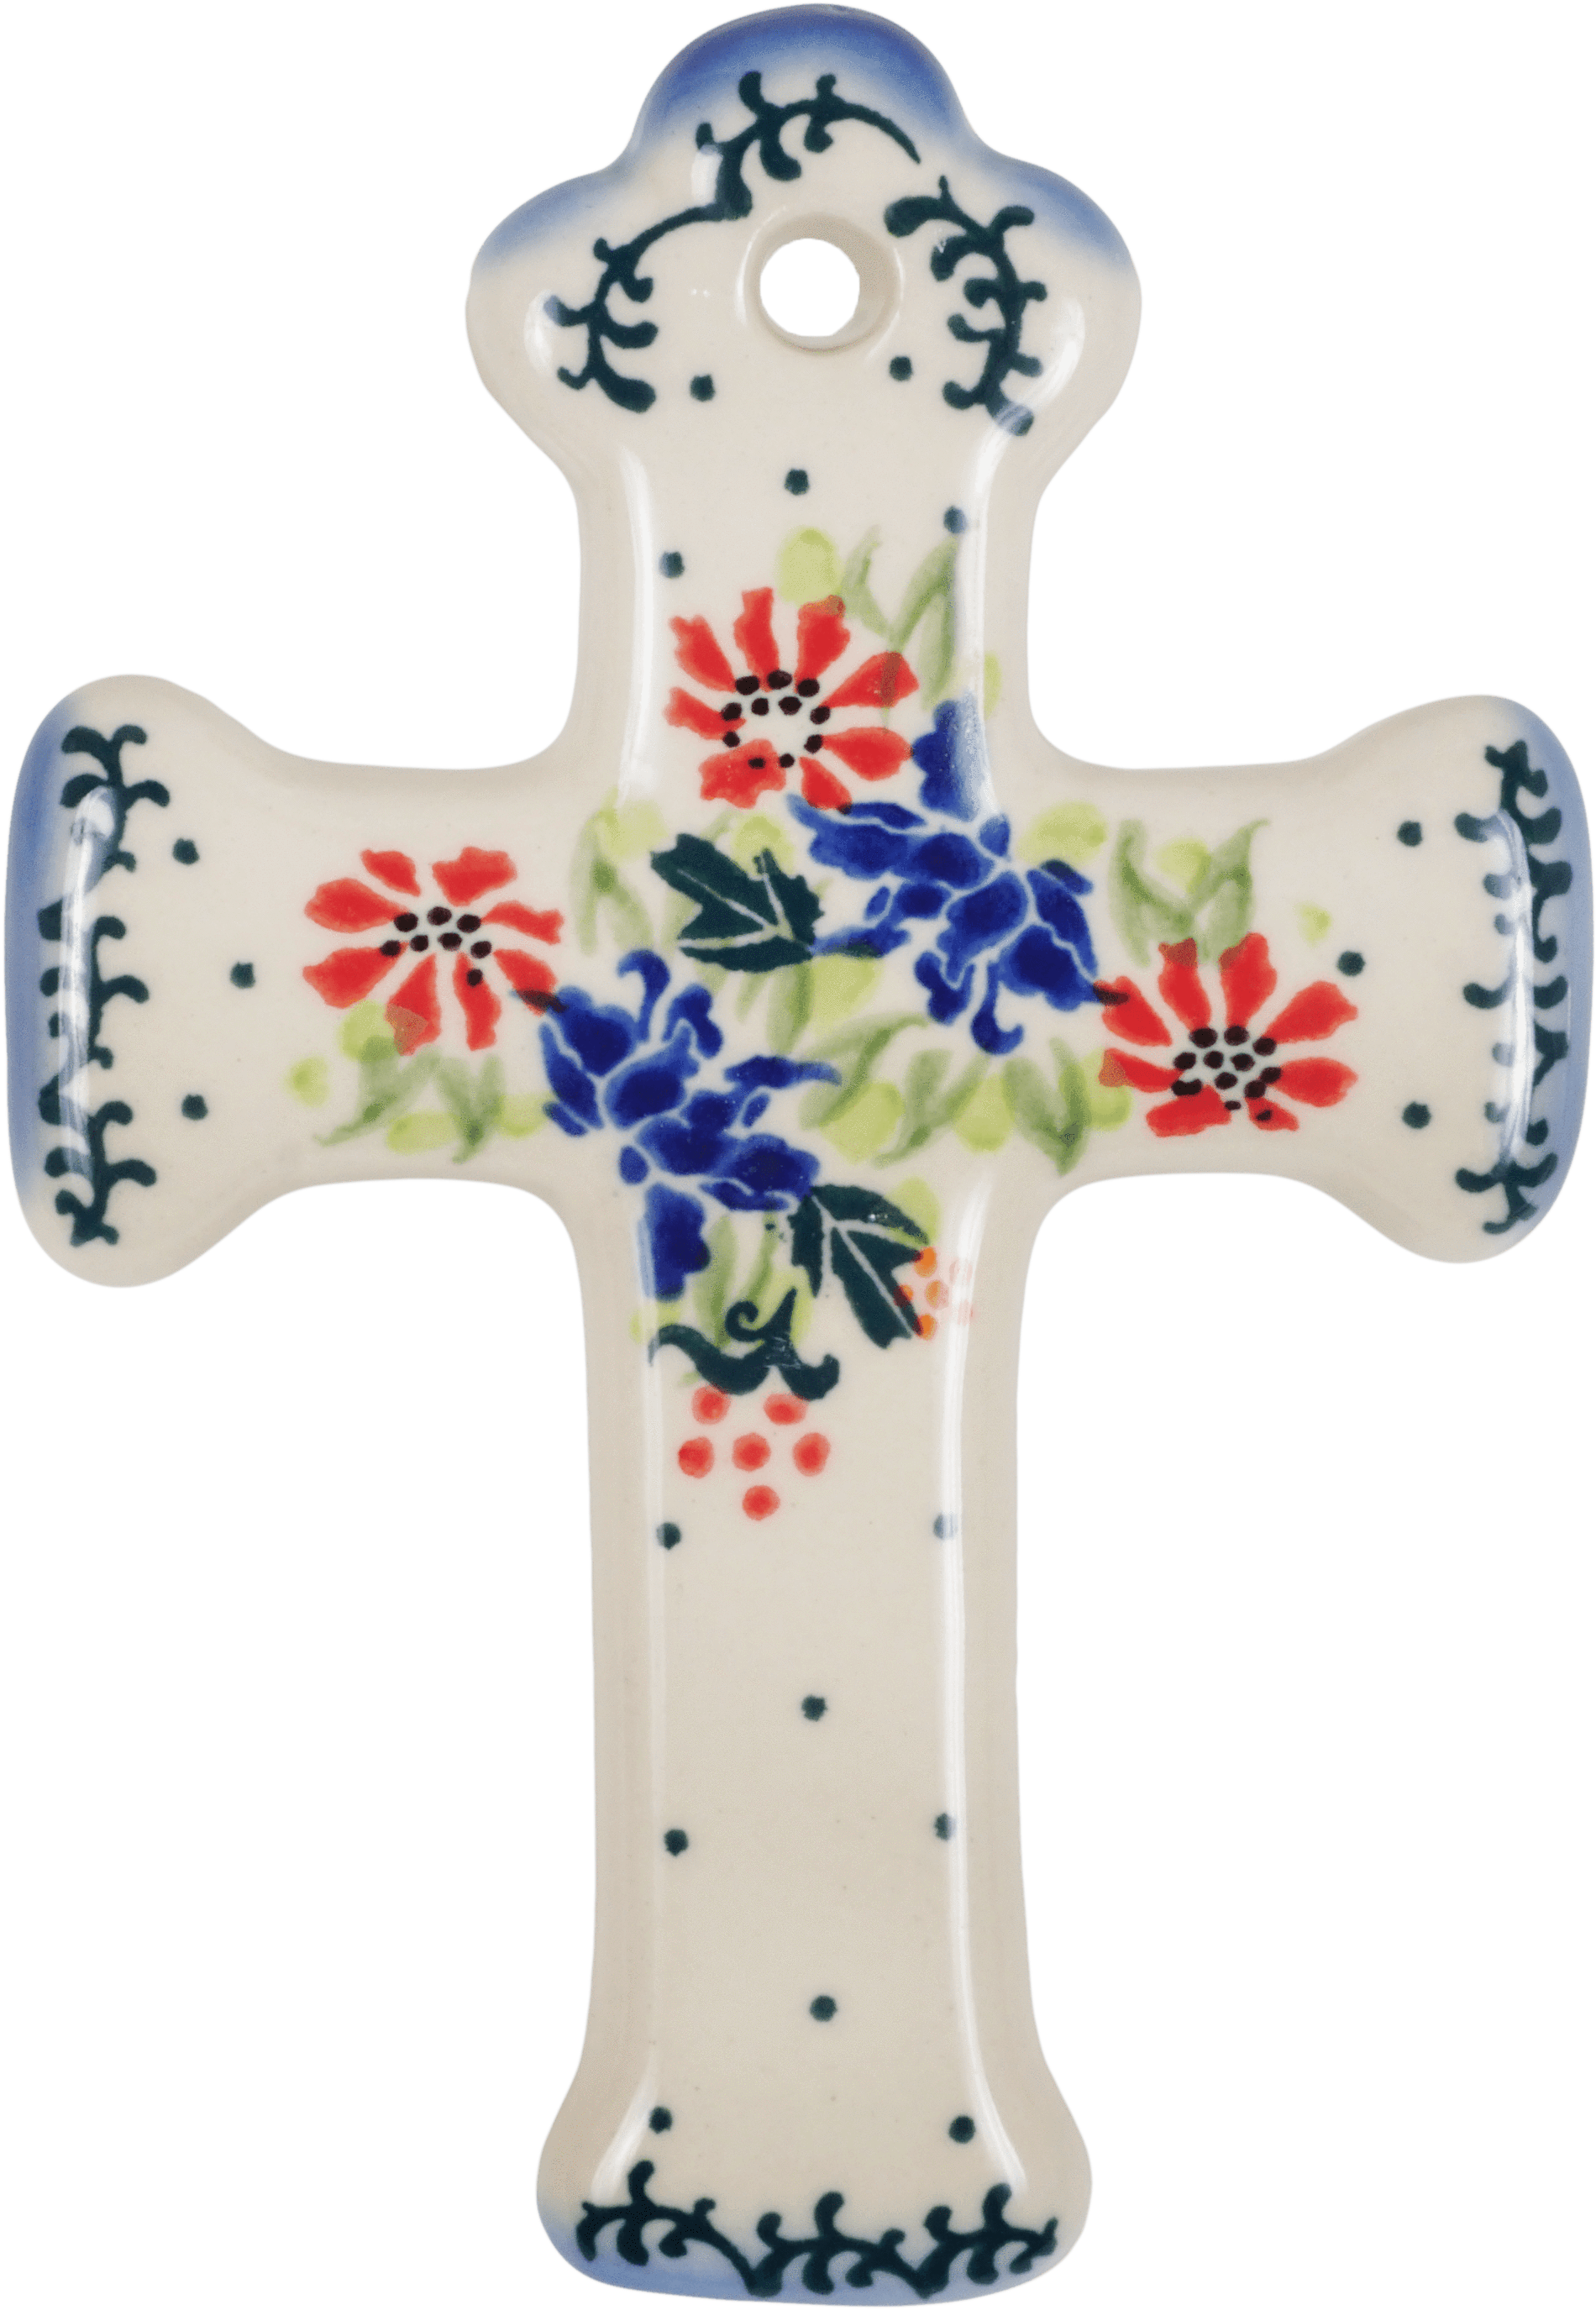 A White Cross With Red And Blue Flowers